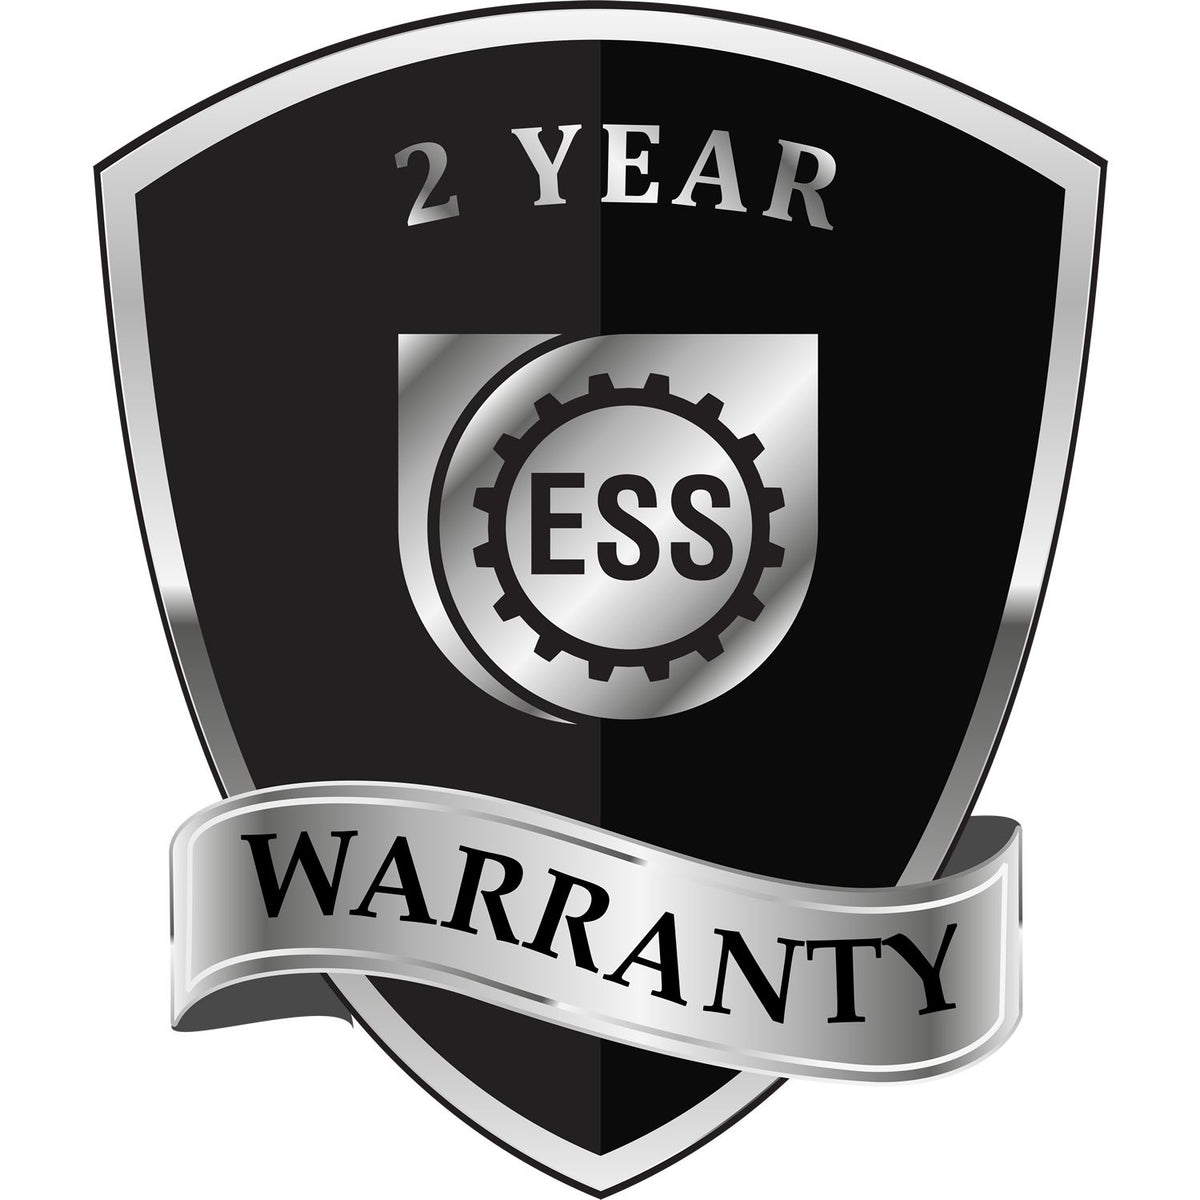 A badge or emblem showing a warranty icon for the Extended Long Reach Kansas Architect Seal Embosser